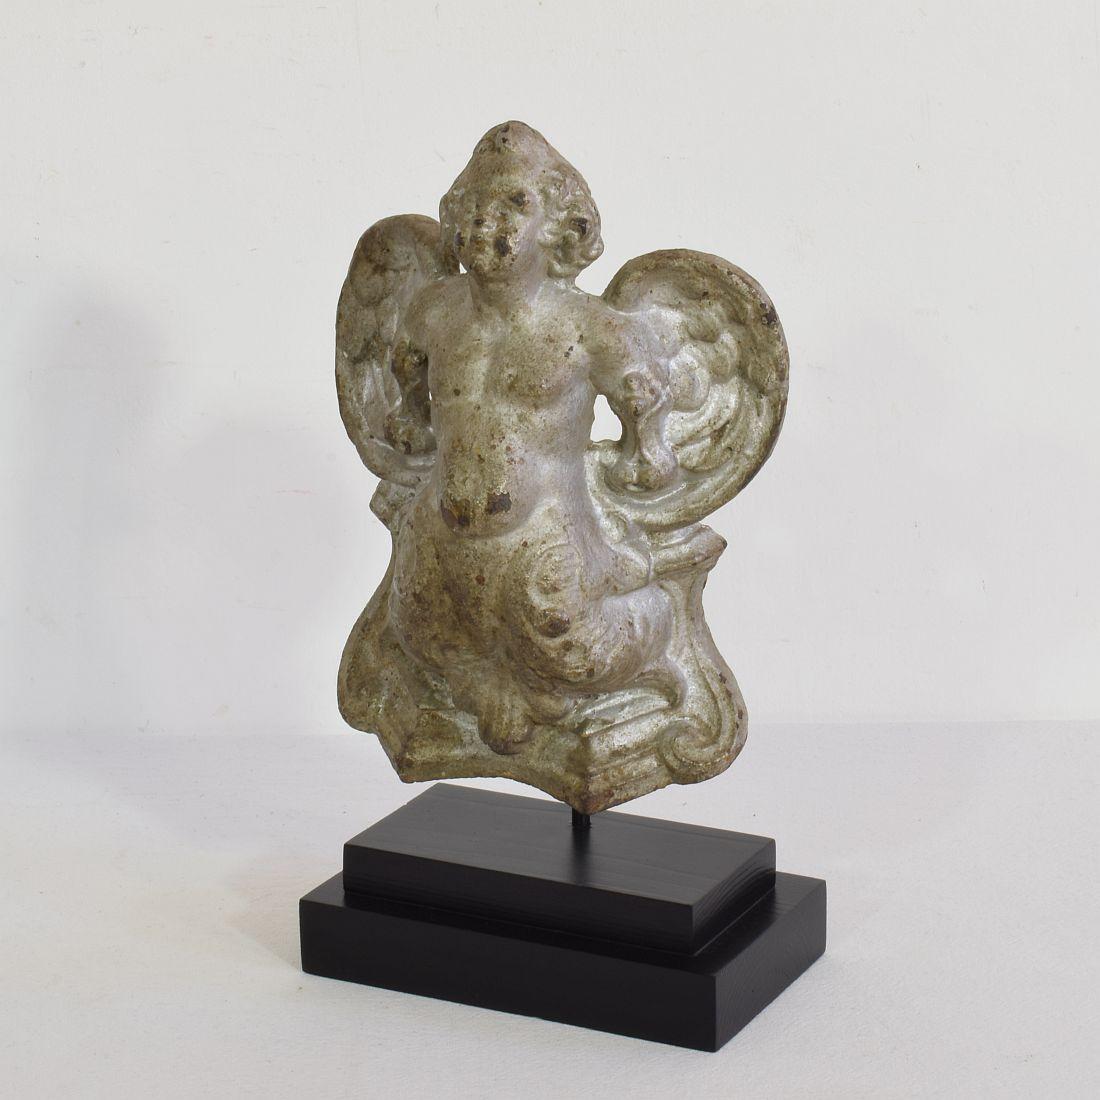 Very nice and small cast iron angel fragment
France circa 1850-1900.
Weathered.
Measurements includes the wooden base.